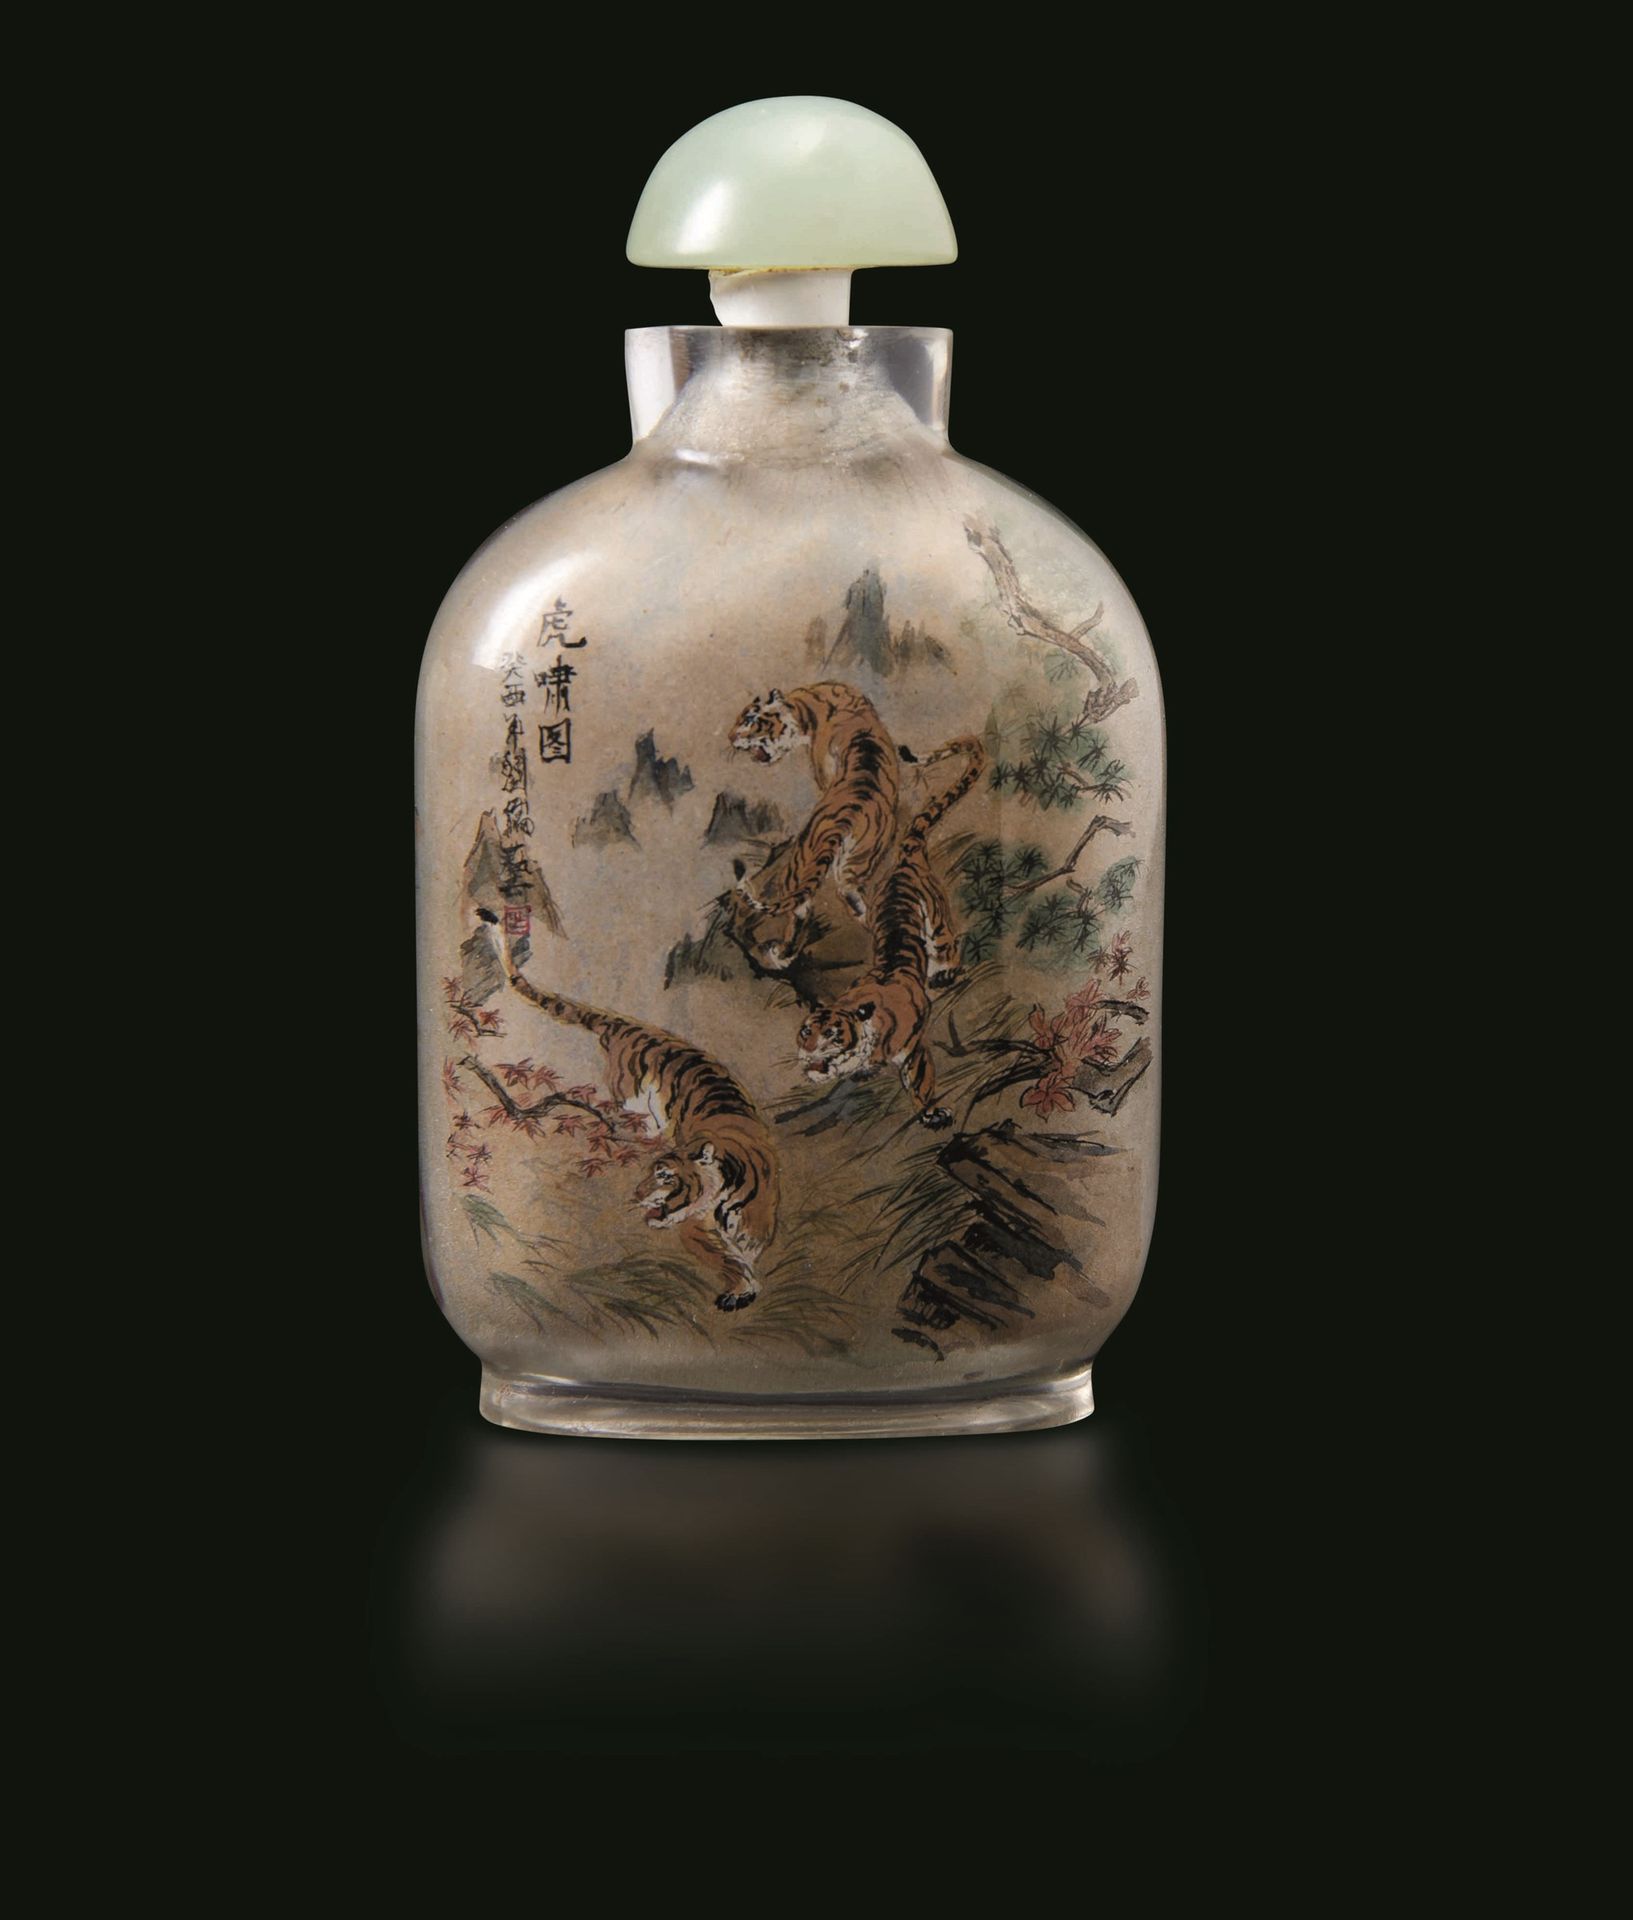 A glass snuff bottle, China, Qing Dynasty, 1800s H 8cm